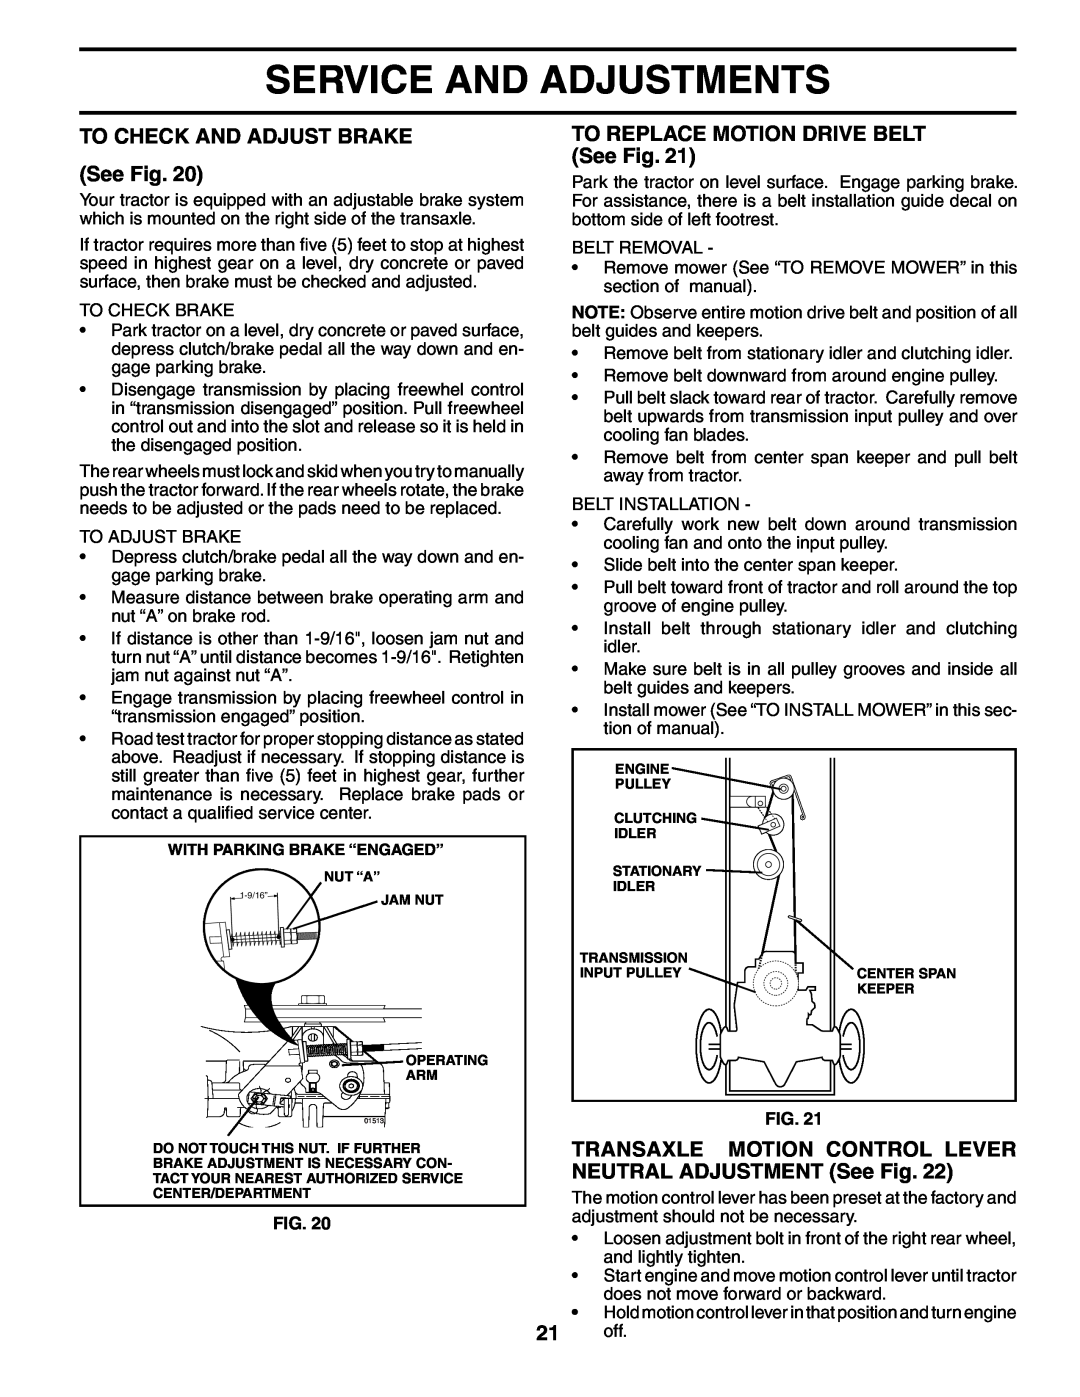 Poulan 195620 manual TO CHECK AND ADJUST BRAKE See Fig, TO REPLACE MOTION DRIVE BELT See Fig, Service And Adjustments 